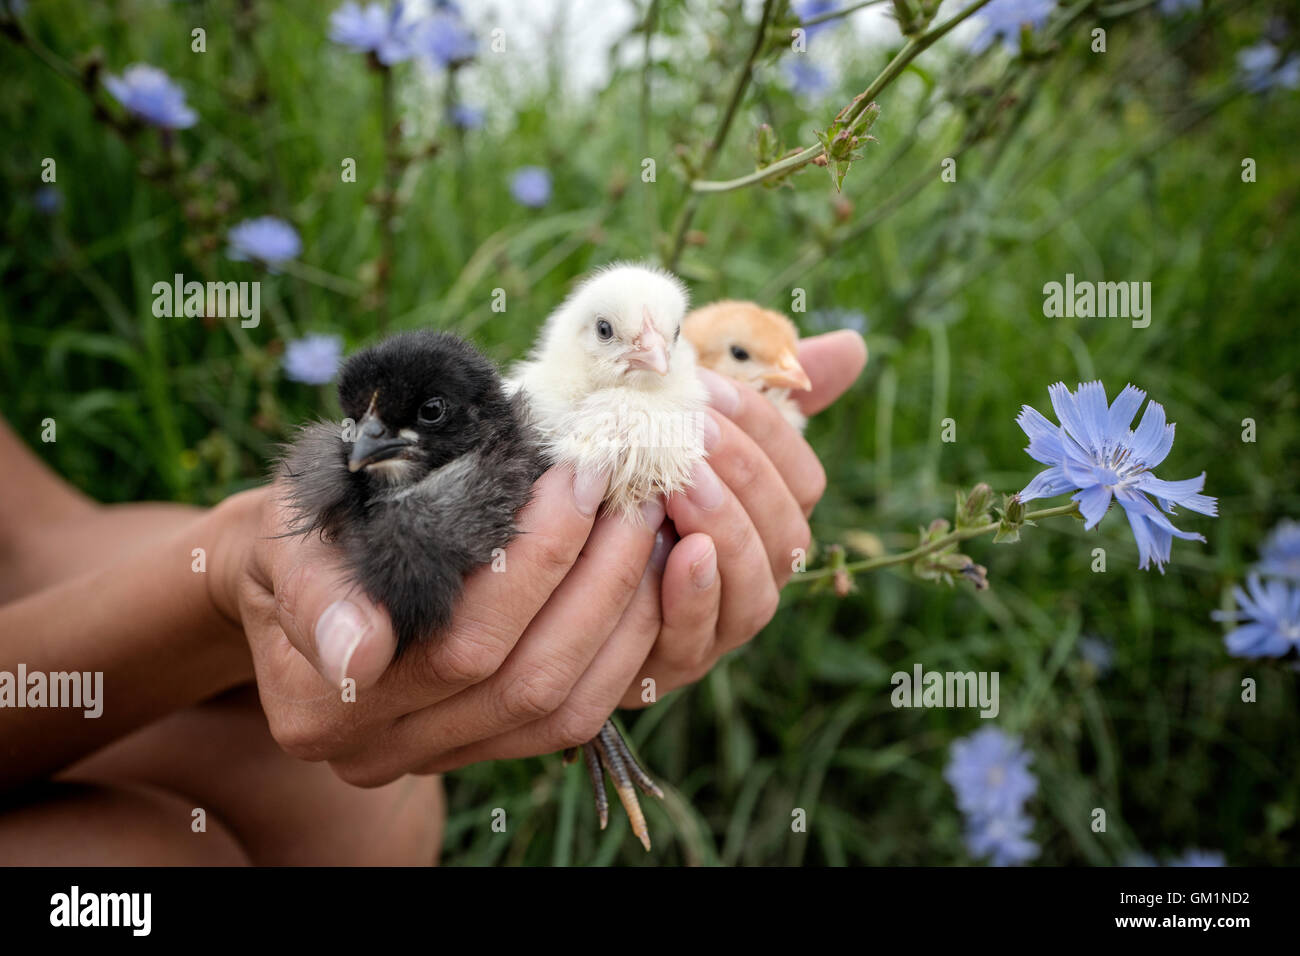 Black, yellow and white small cute chikcens in human's hand Stock Photo